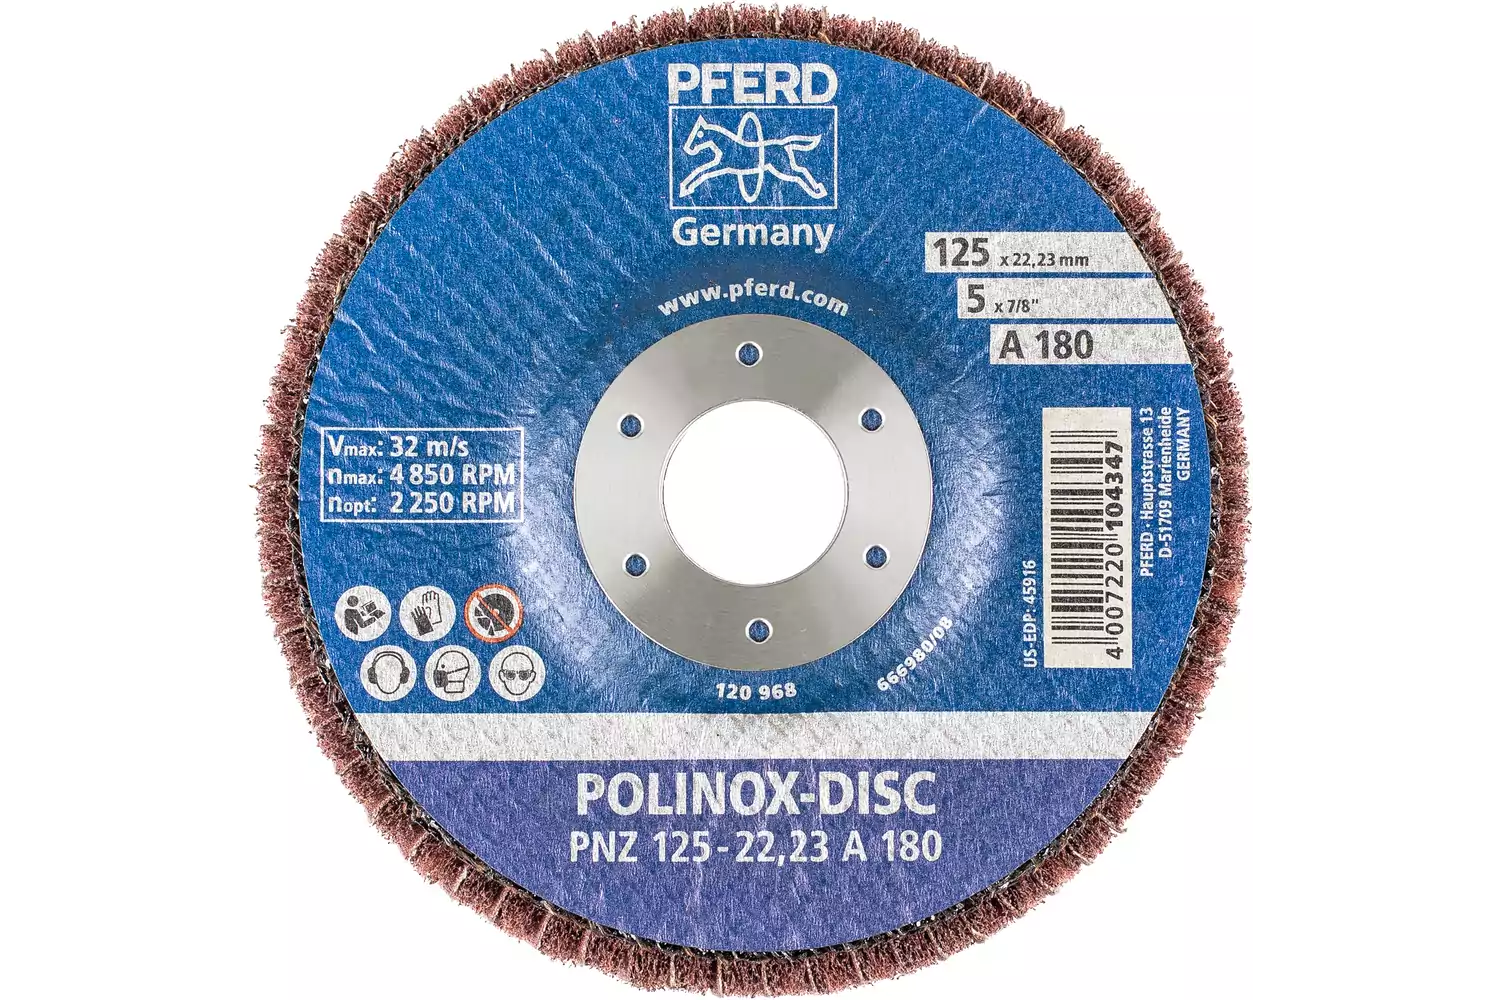 POLINOX non-woven fibre-backing disc PNZ dia. 125 mm centre hole dia. 22.23 mm A180 for fine grinding and finishing 3